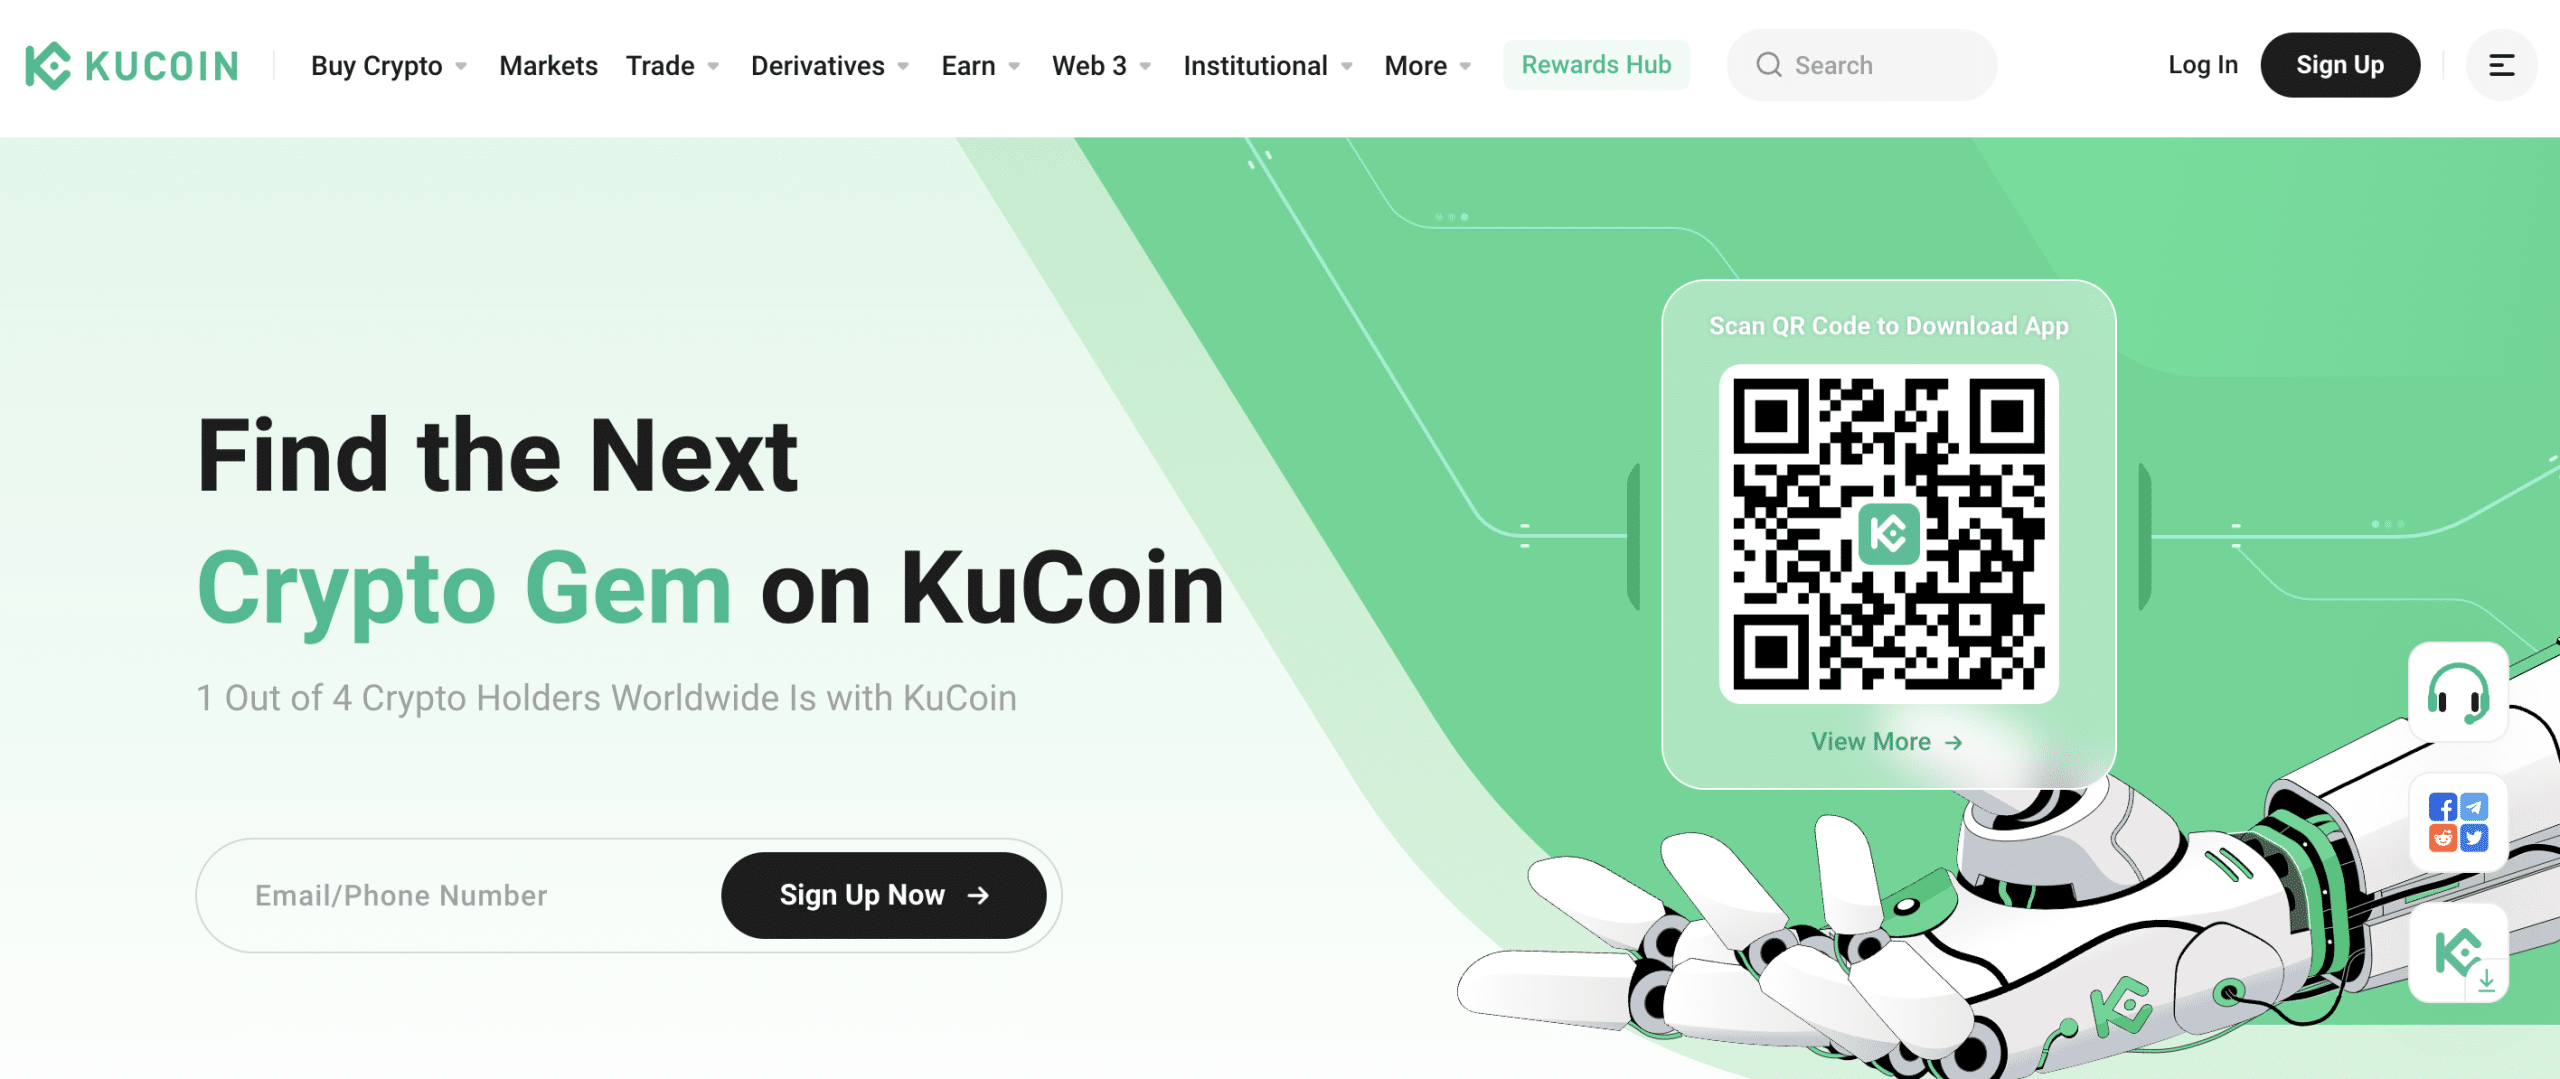 KuCoin review 